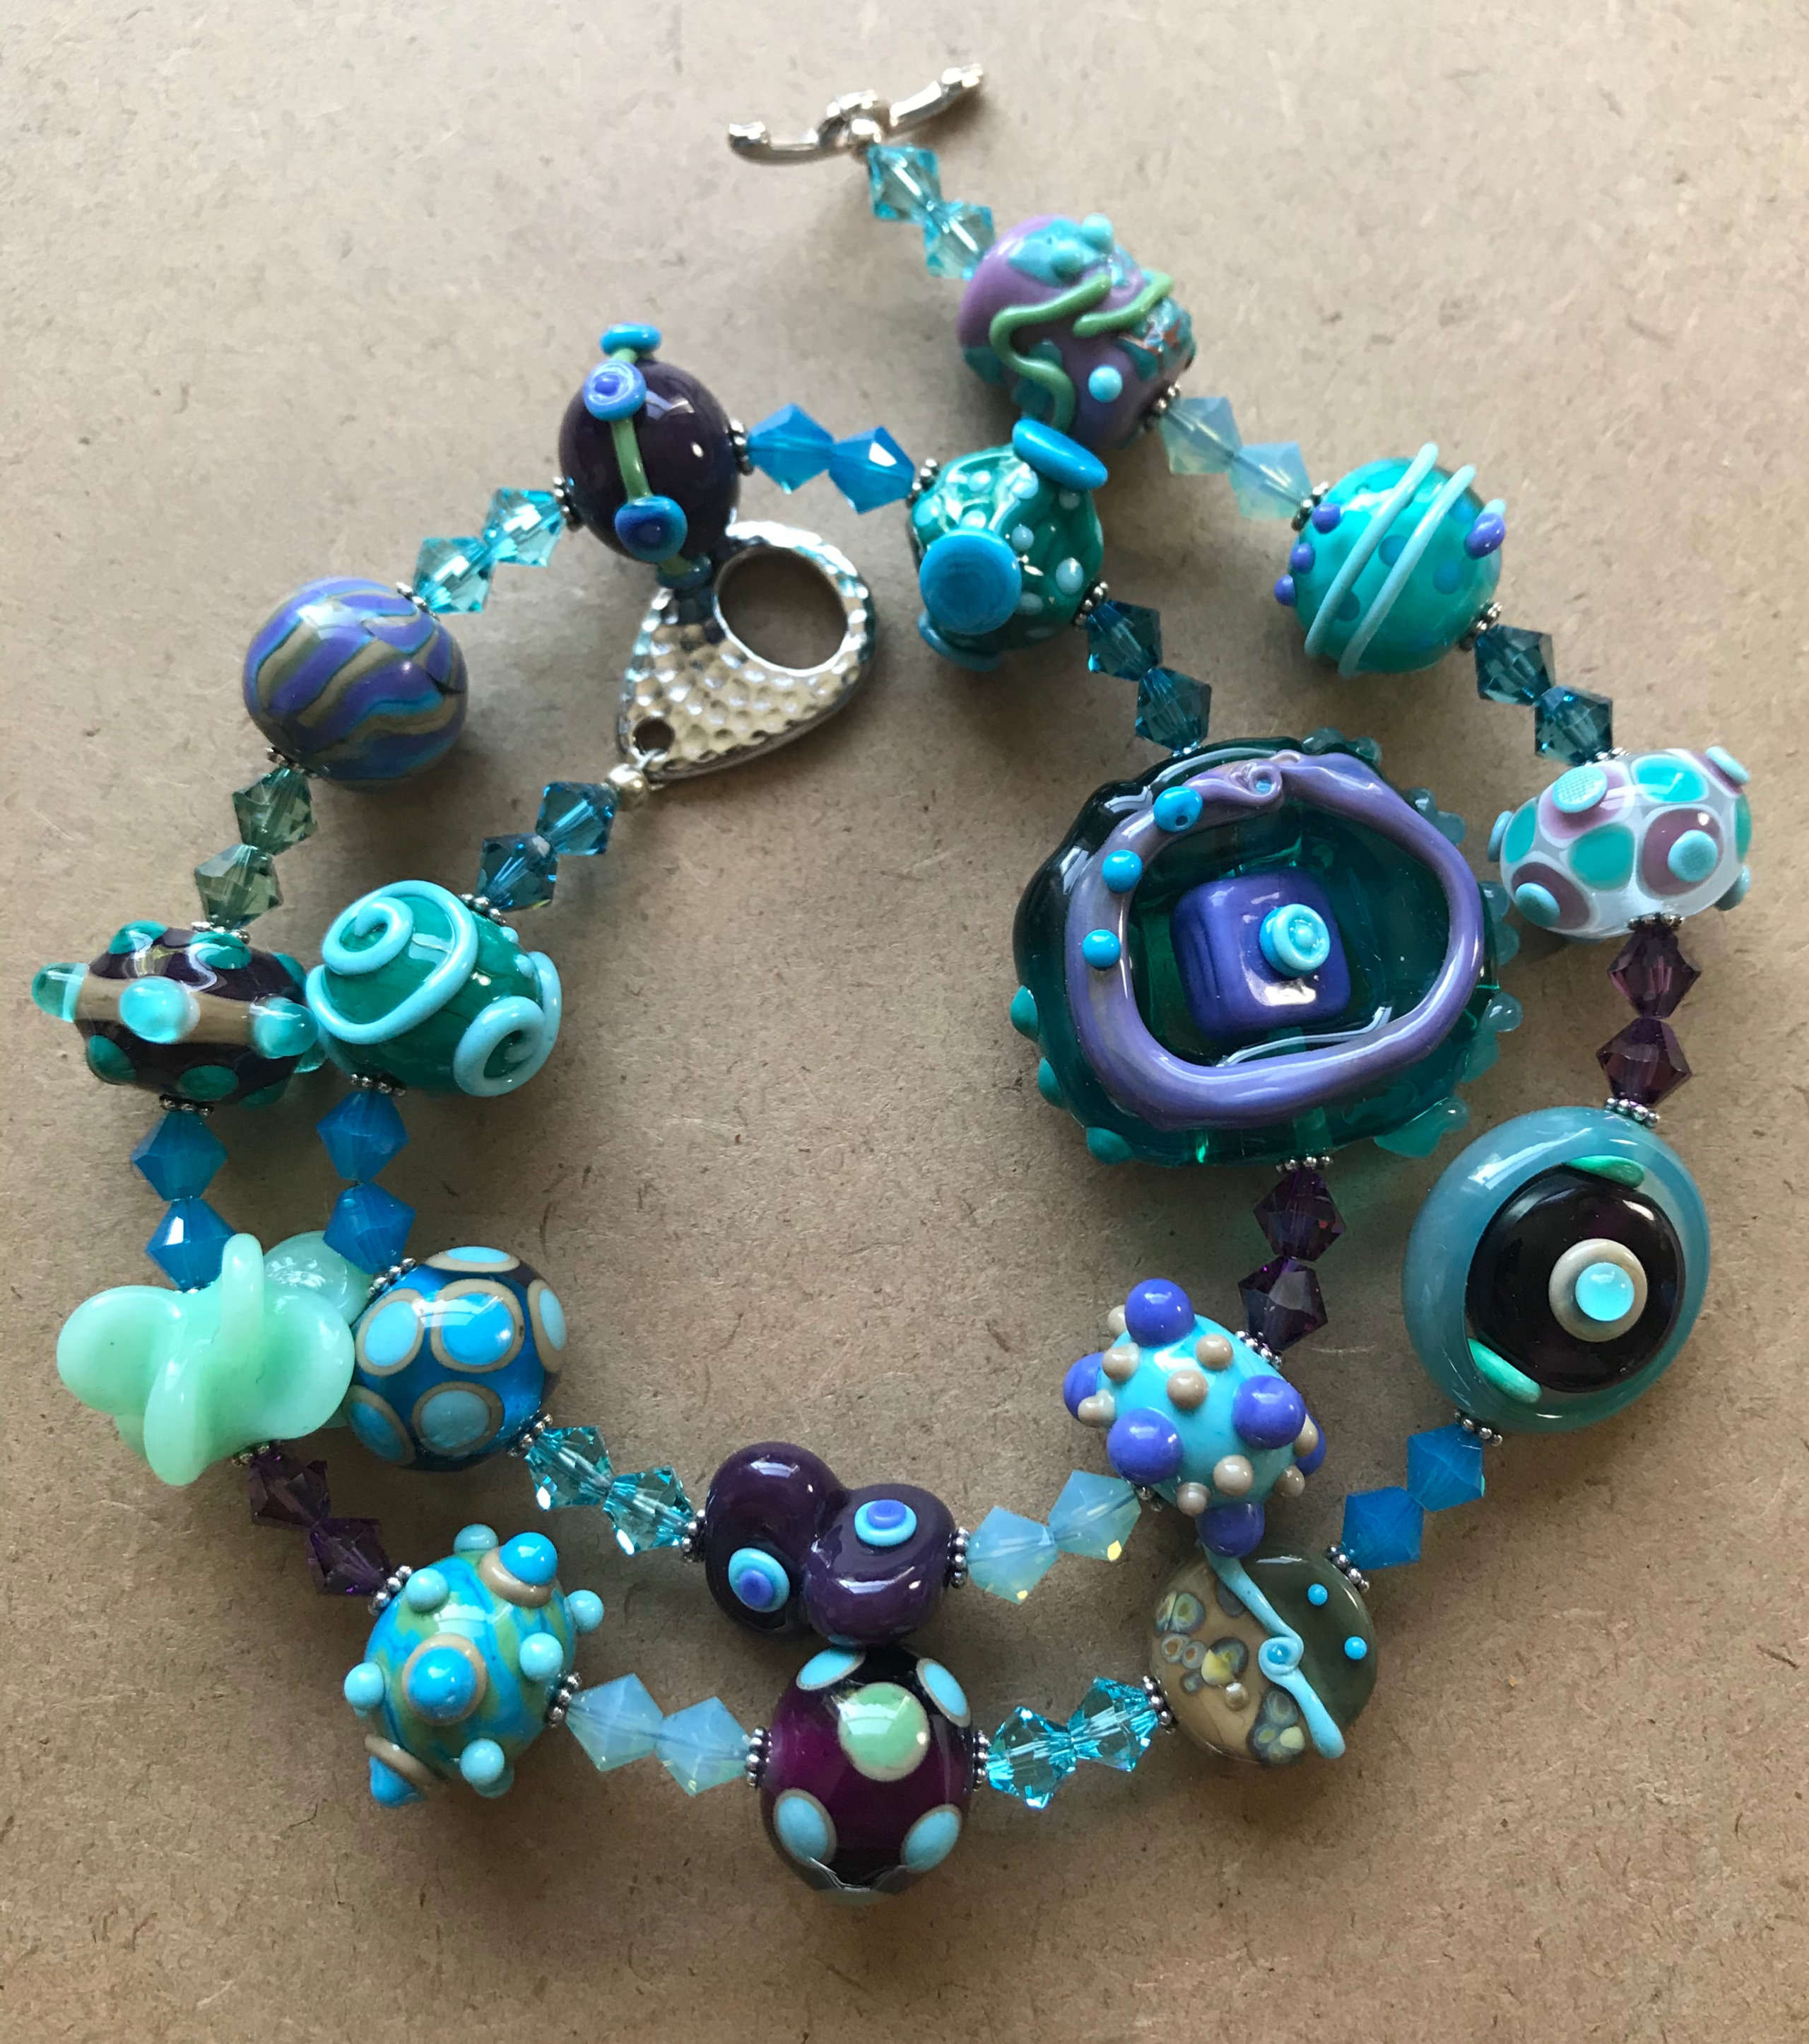 Original Lampwork Glass and Sterling Silver Beaded Necklace by Debbie Keen